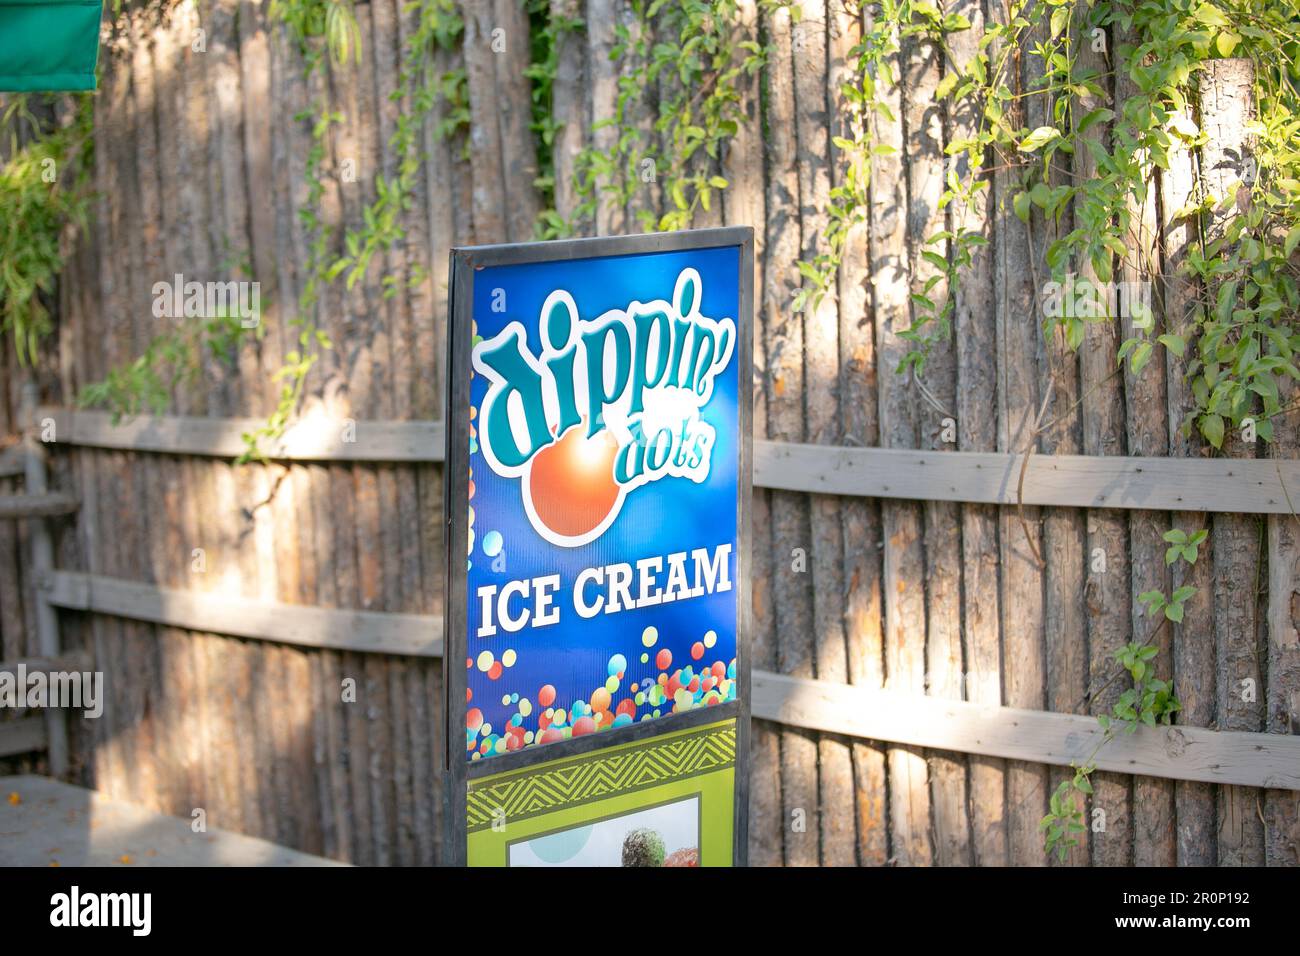 https://c8.alamy.com/comp/2R0P192/san-diego-california-united-states-09-23-2021-a-view-of-a-sign-selling-dippin-dots-ice-cream-food-products-2R0P192.jpg